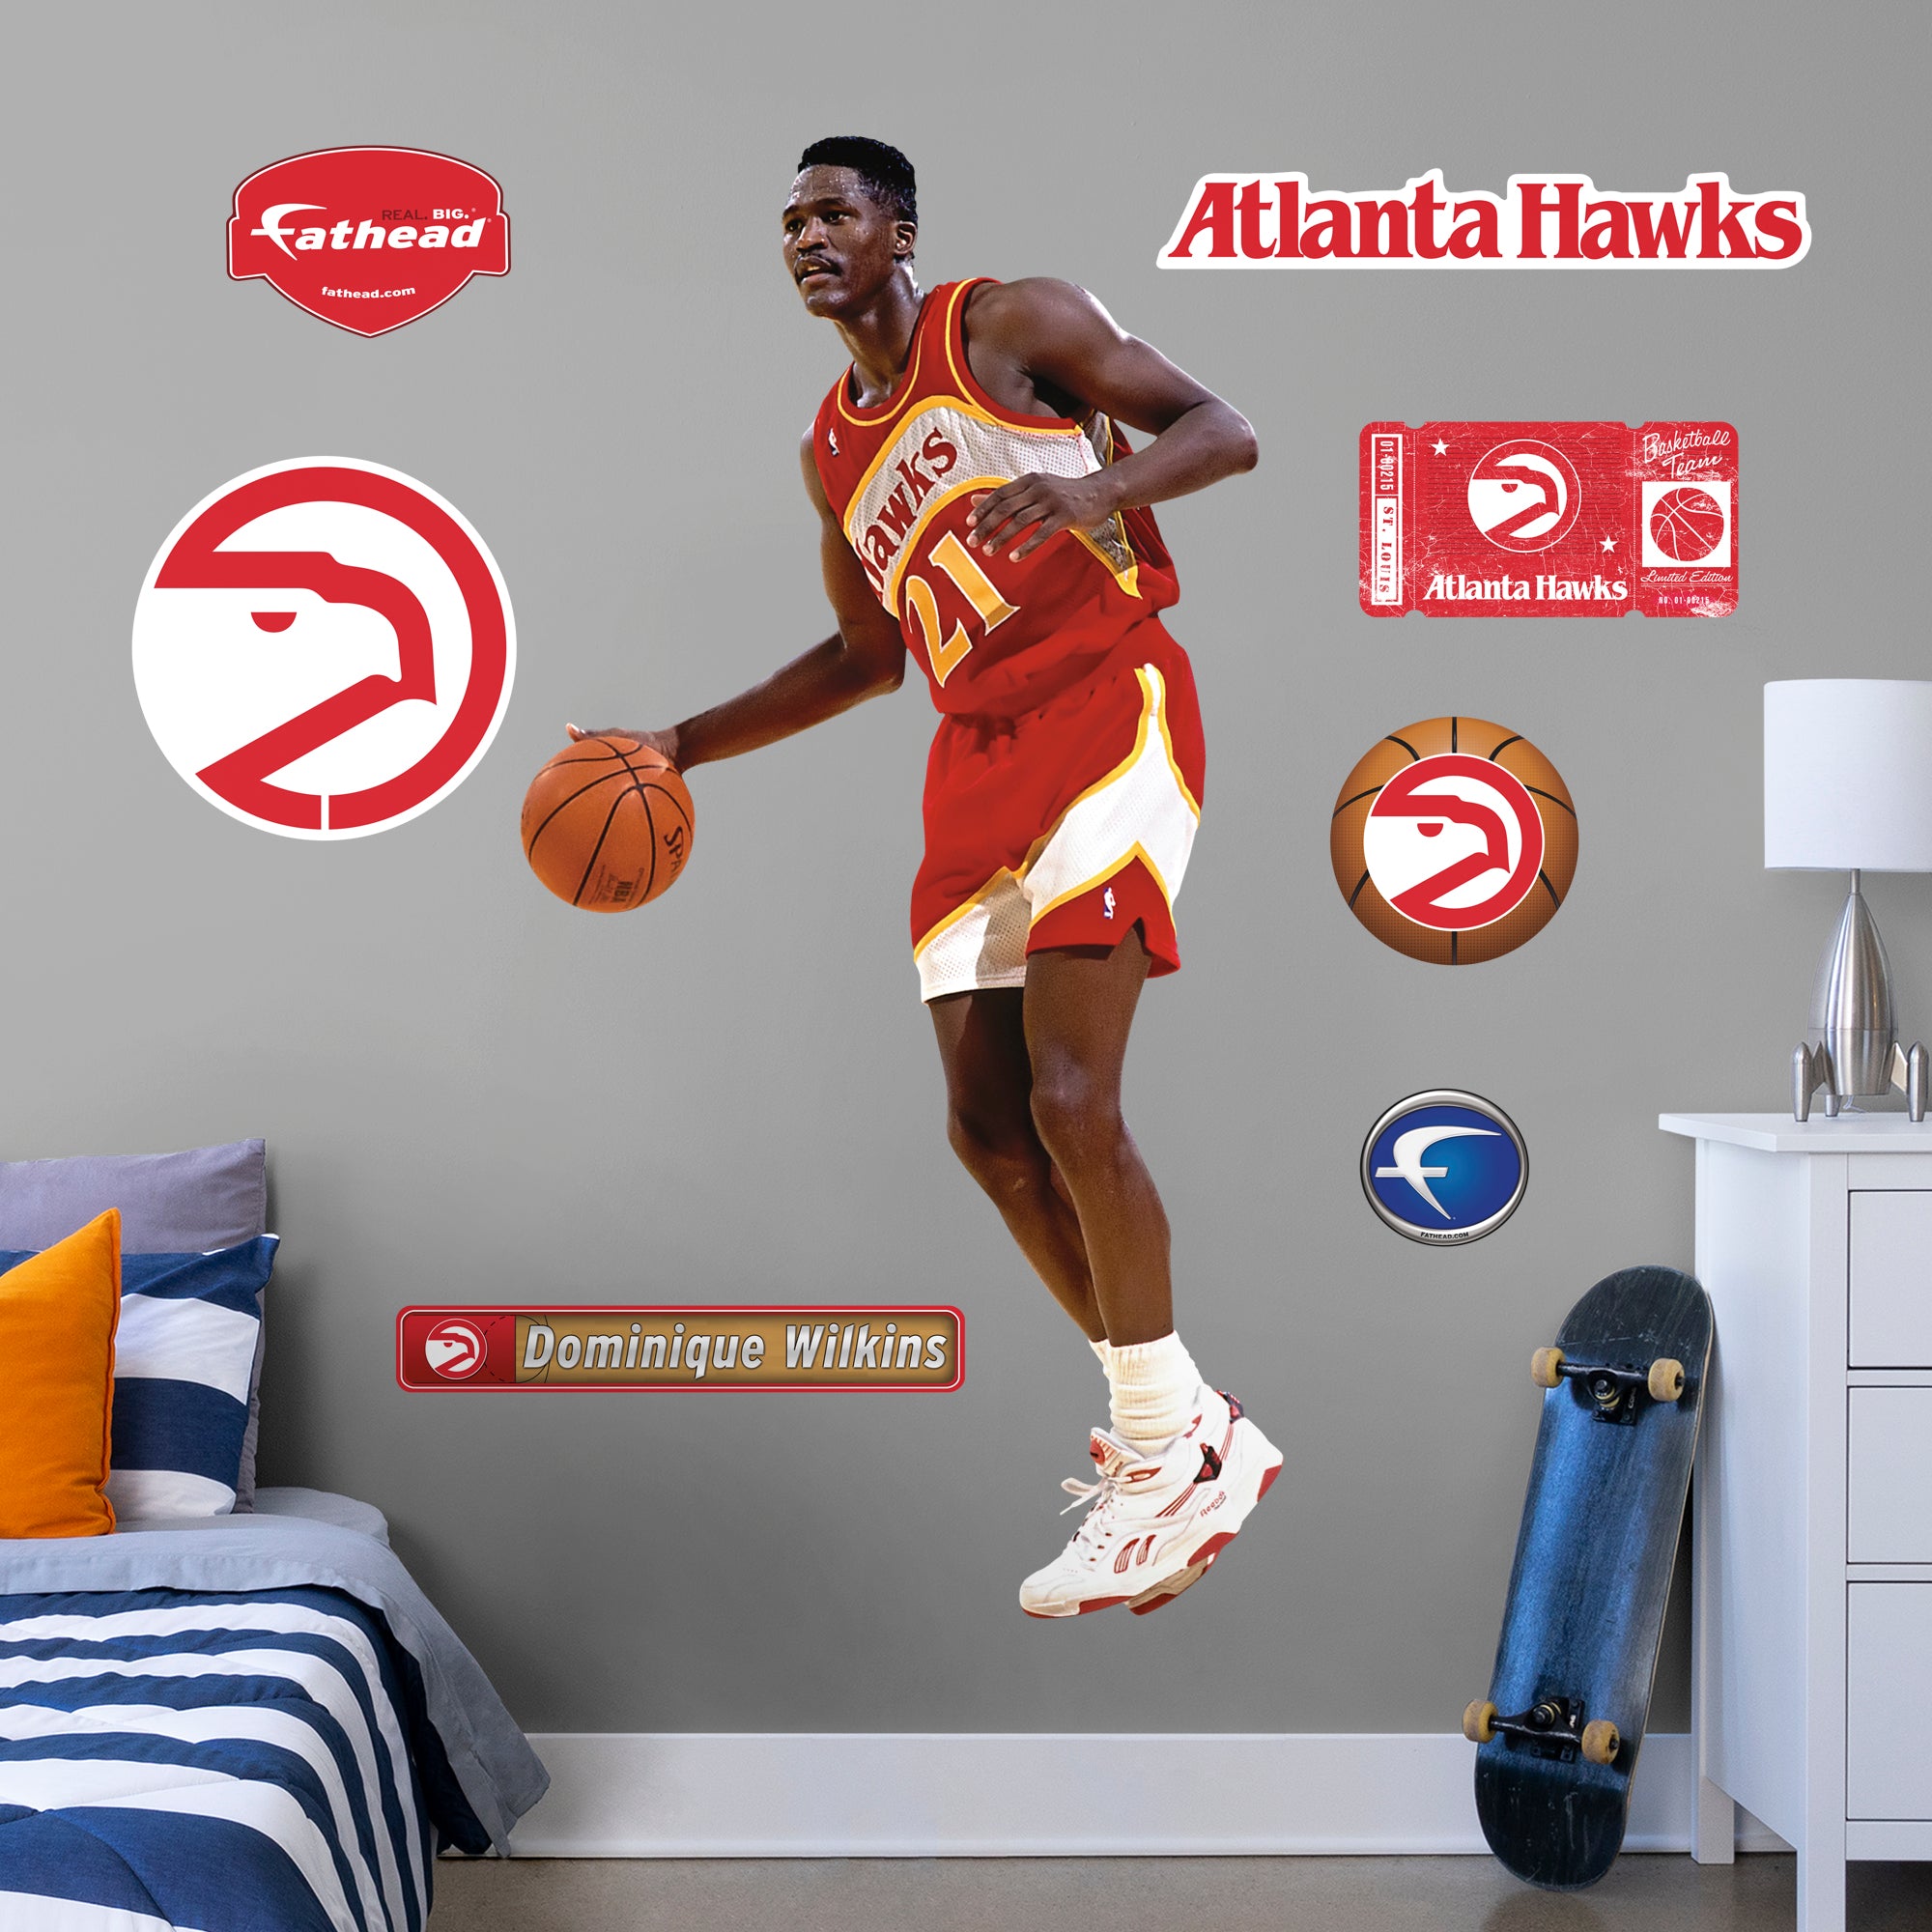 Dominique Wilkins Legend - Officially Licensed NBA Removable Wall Decal Life-Size Athlete + 7 Decals (44"W x 79"H) by Fathead |